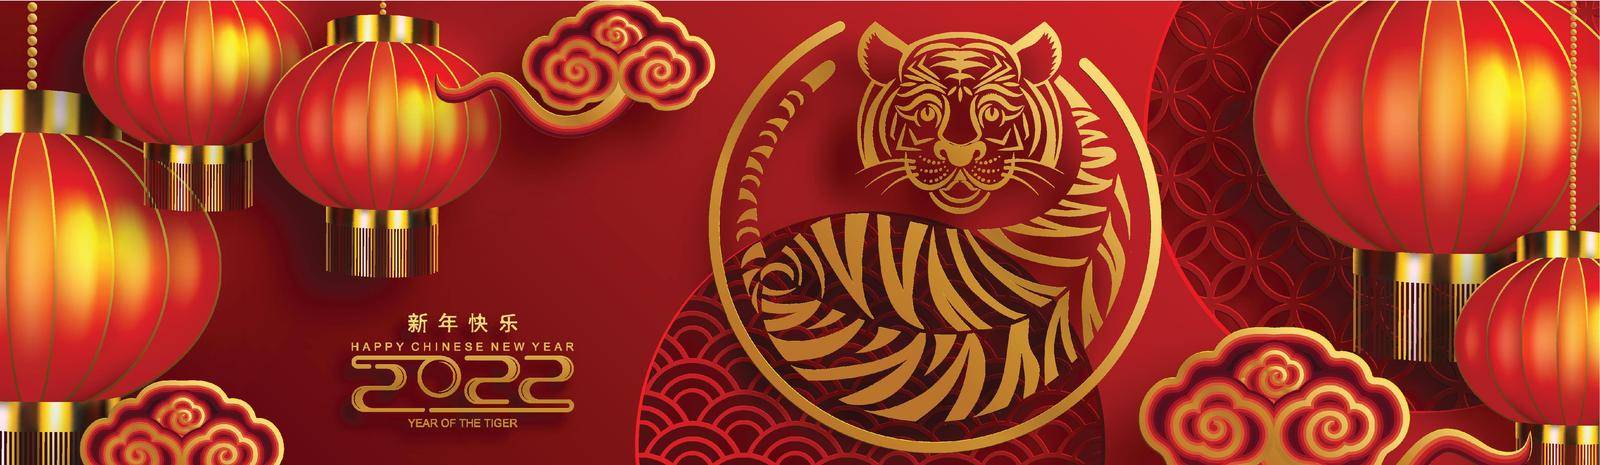 Happy chinese new year 2022 year of the tiger by SiamVector